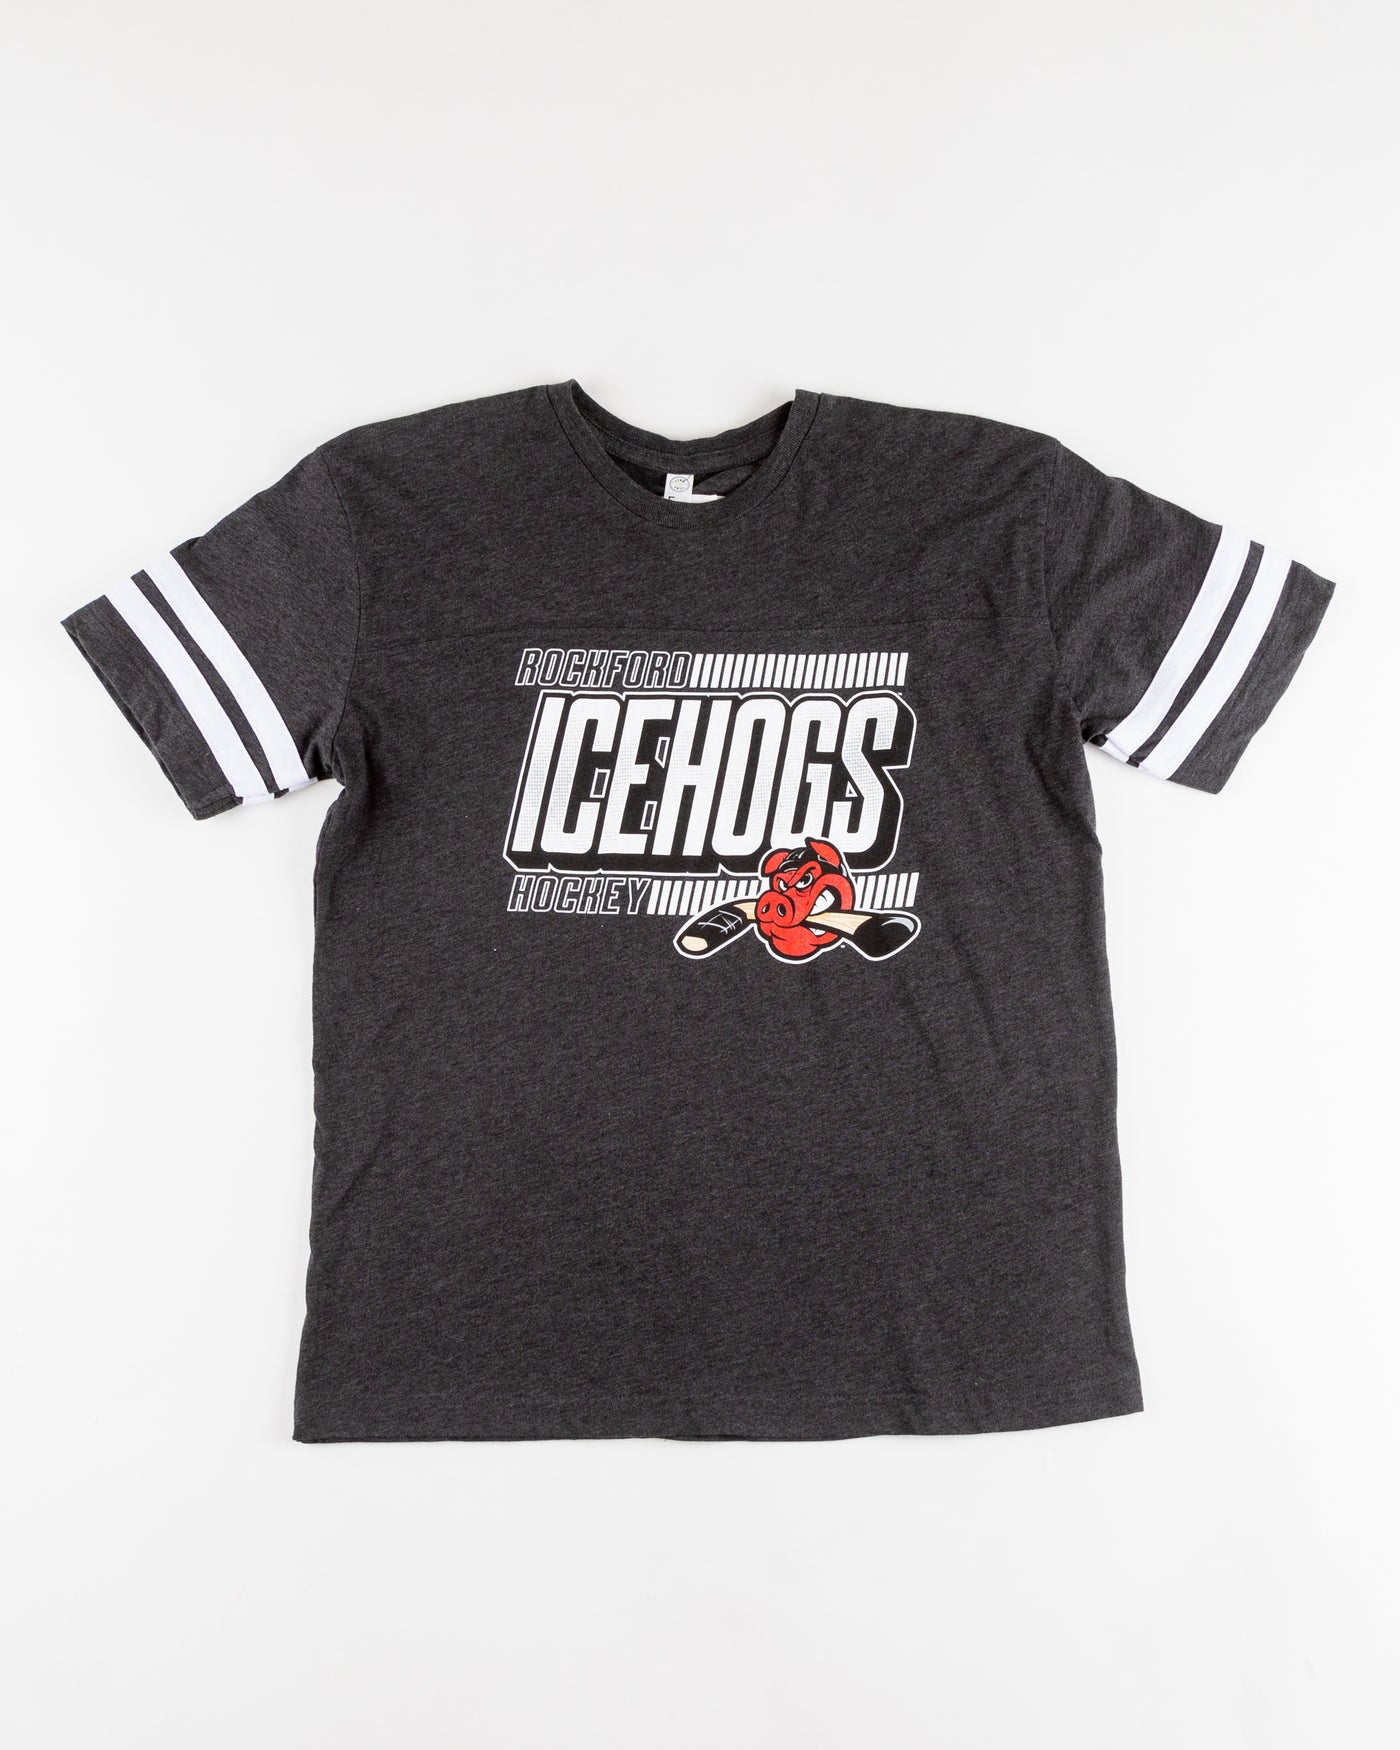 grey Rockford IceHogs youth t-shirt with wordmark across chest - front lay flat